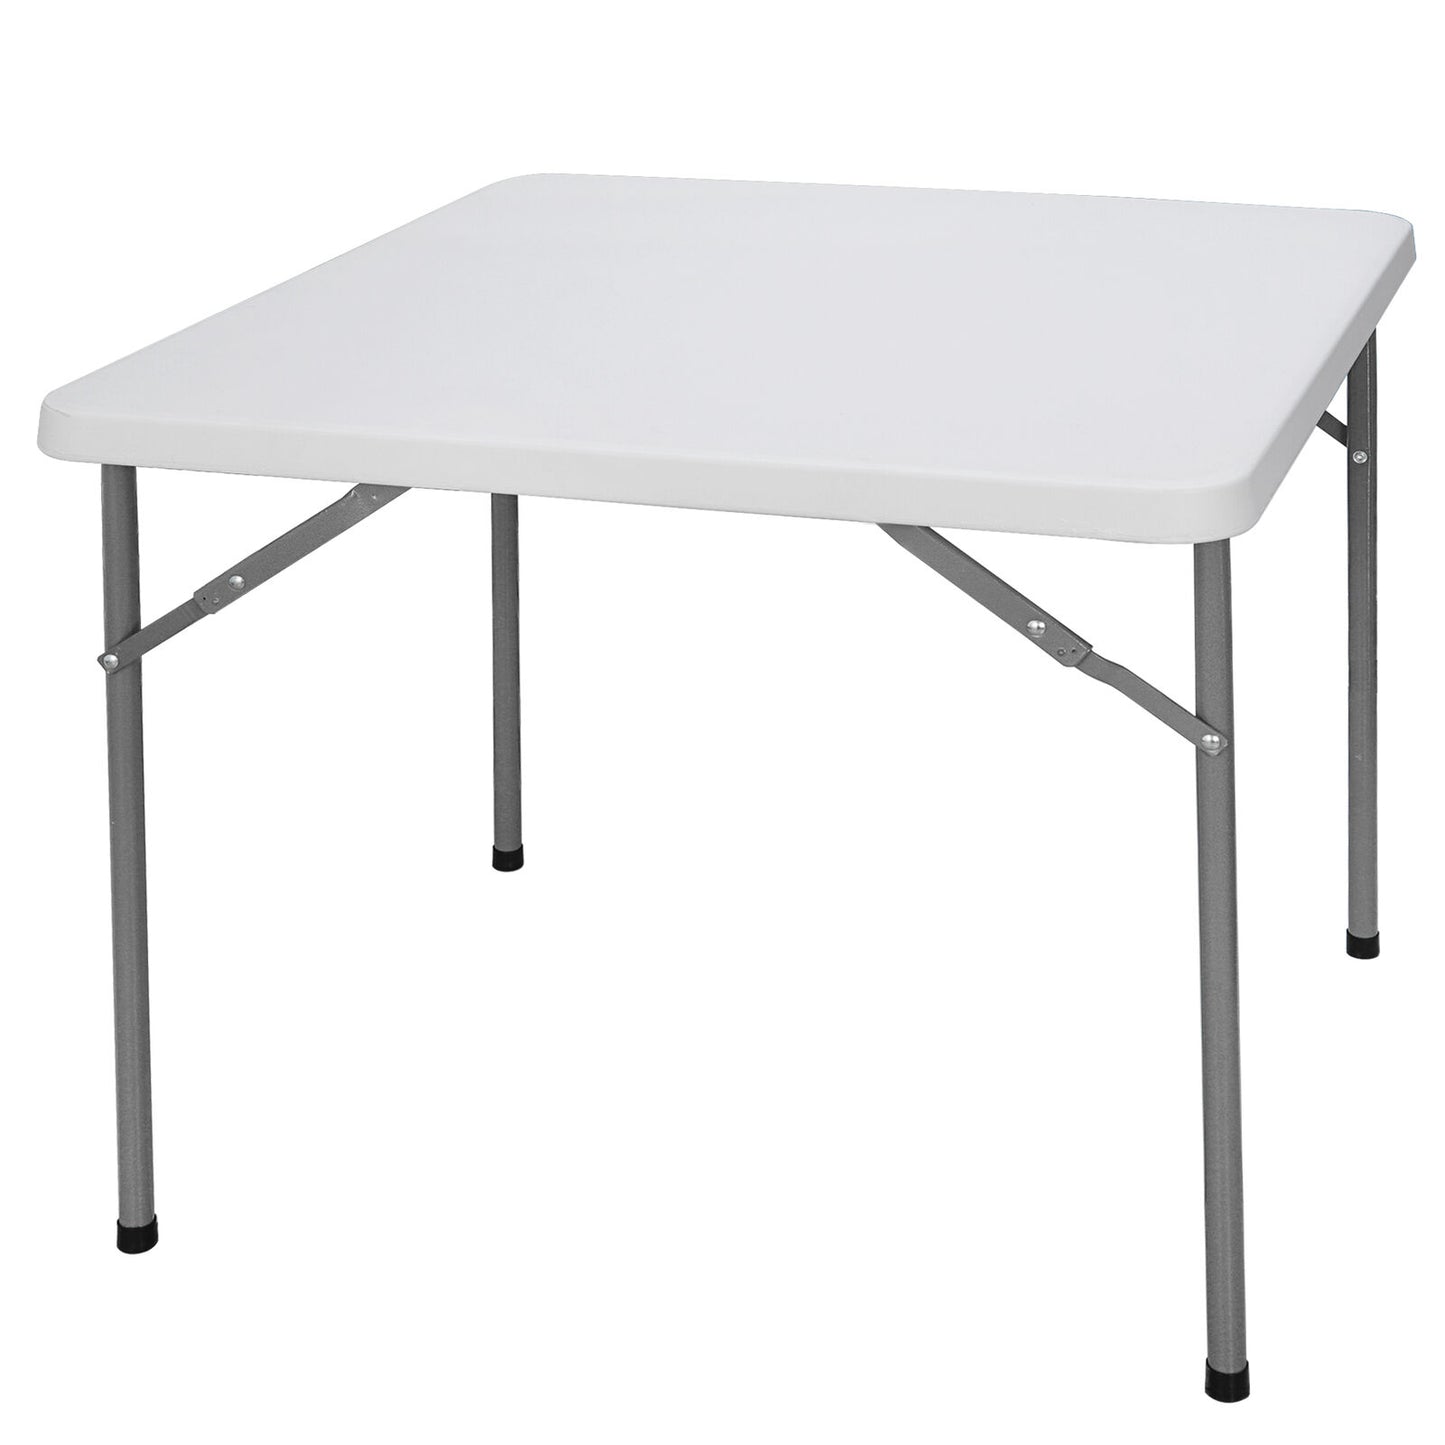 2PCS 3ft Height Adjustable Craft Camping and Utility Folding Carry Table White